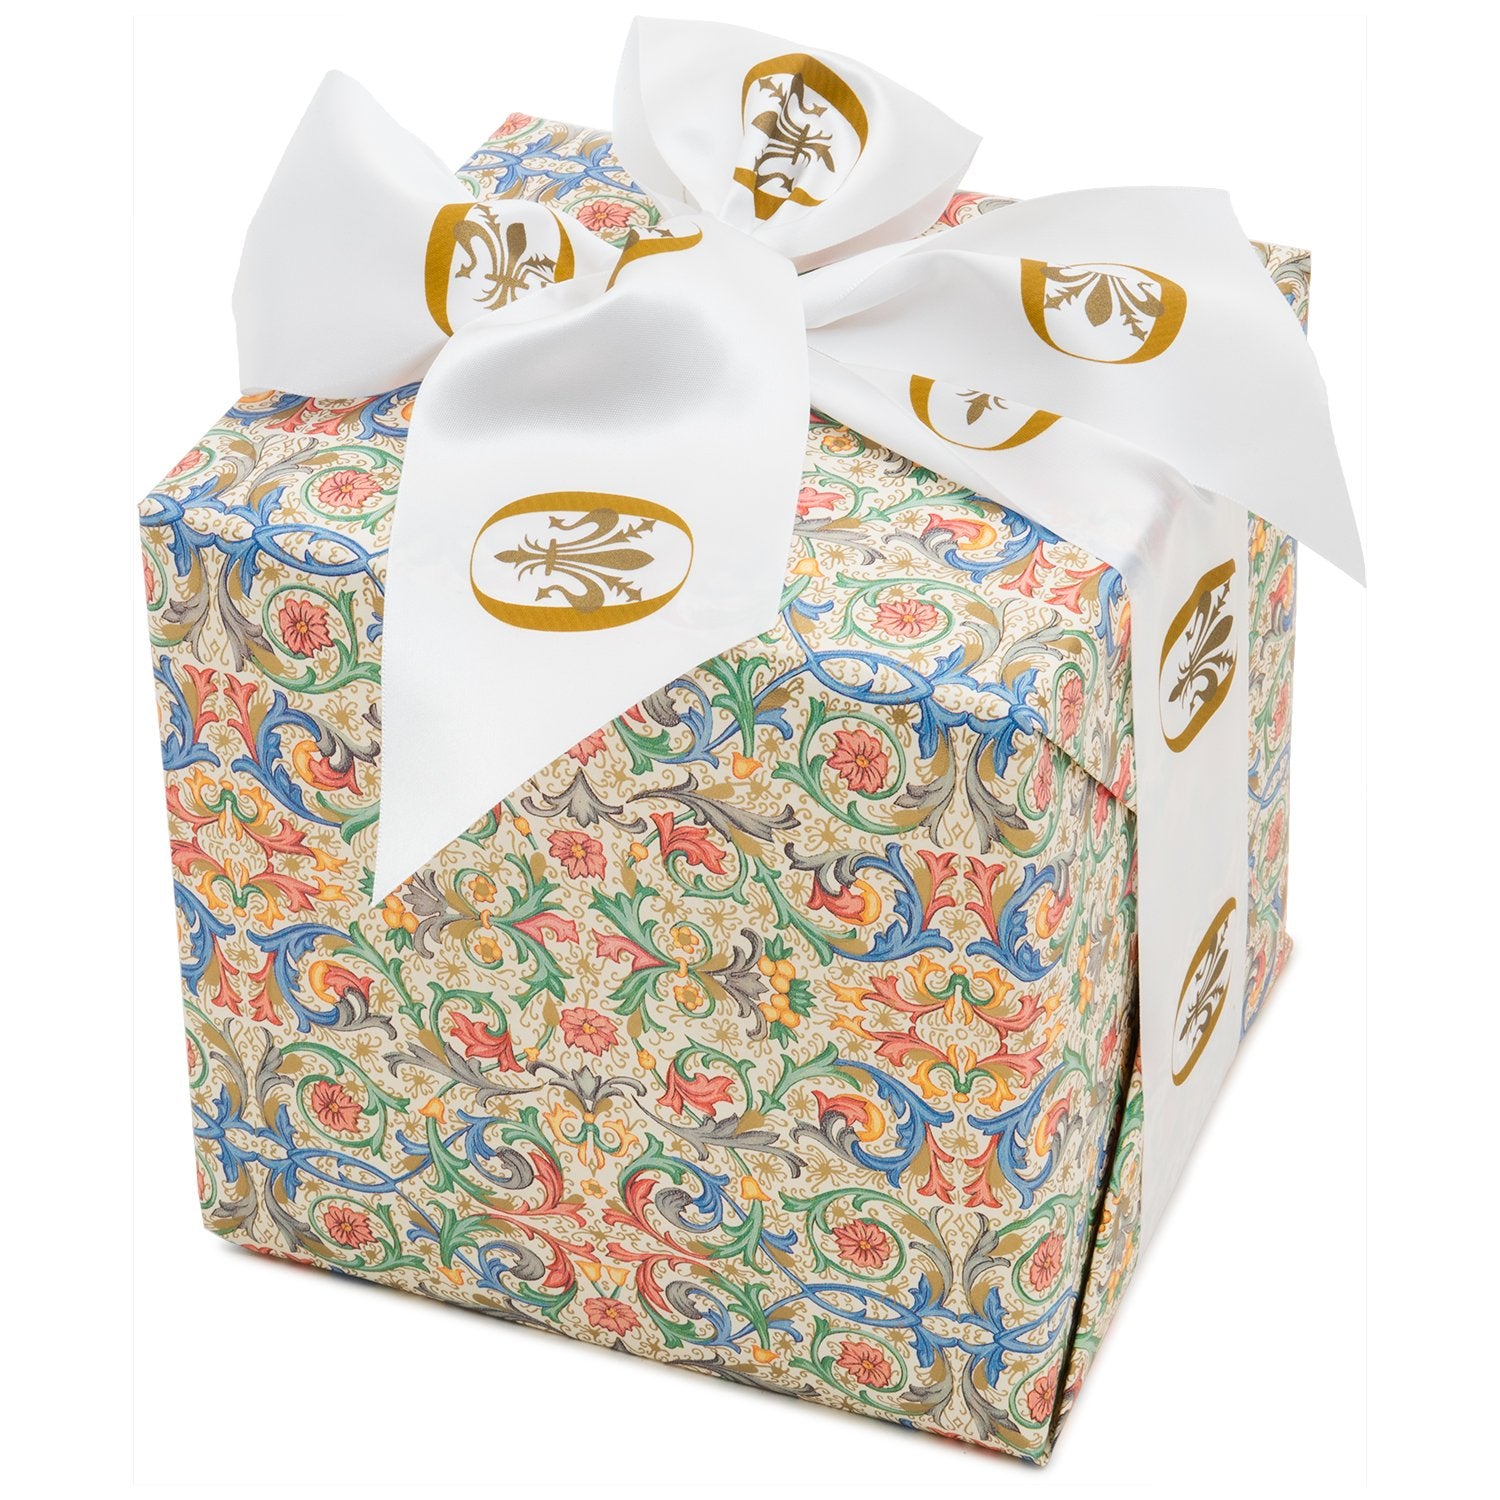 Buy The Gift Wrap Company 6 Count Square Gift Bags, Medium, Red Scrolls  Online at Low Prices in India - Amazon.in